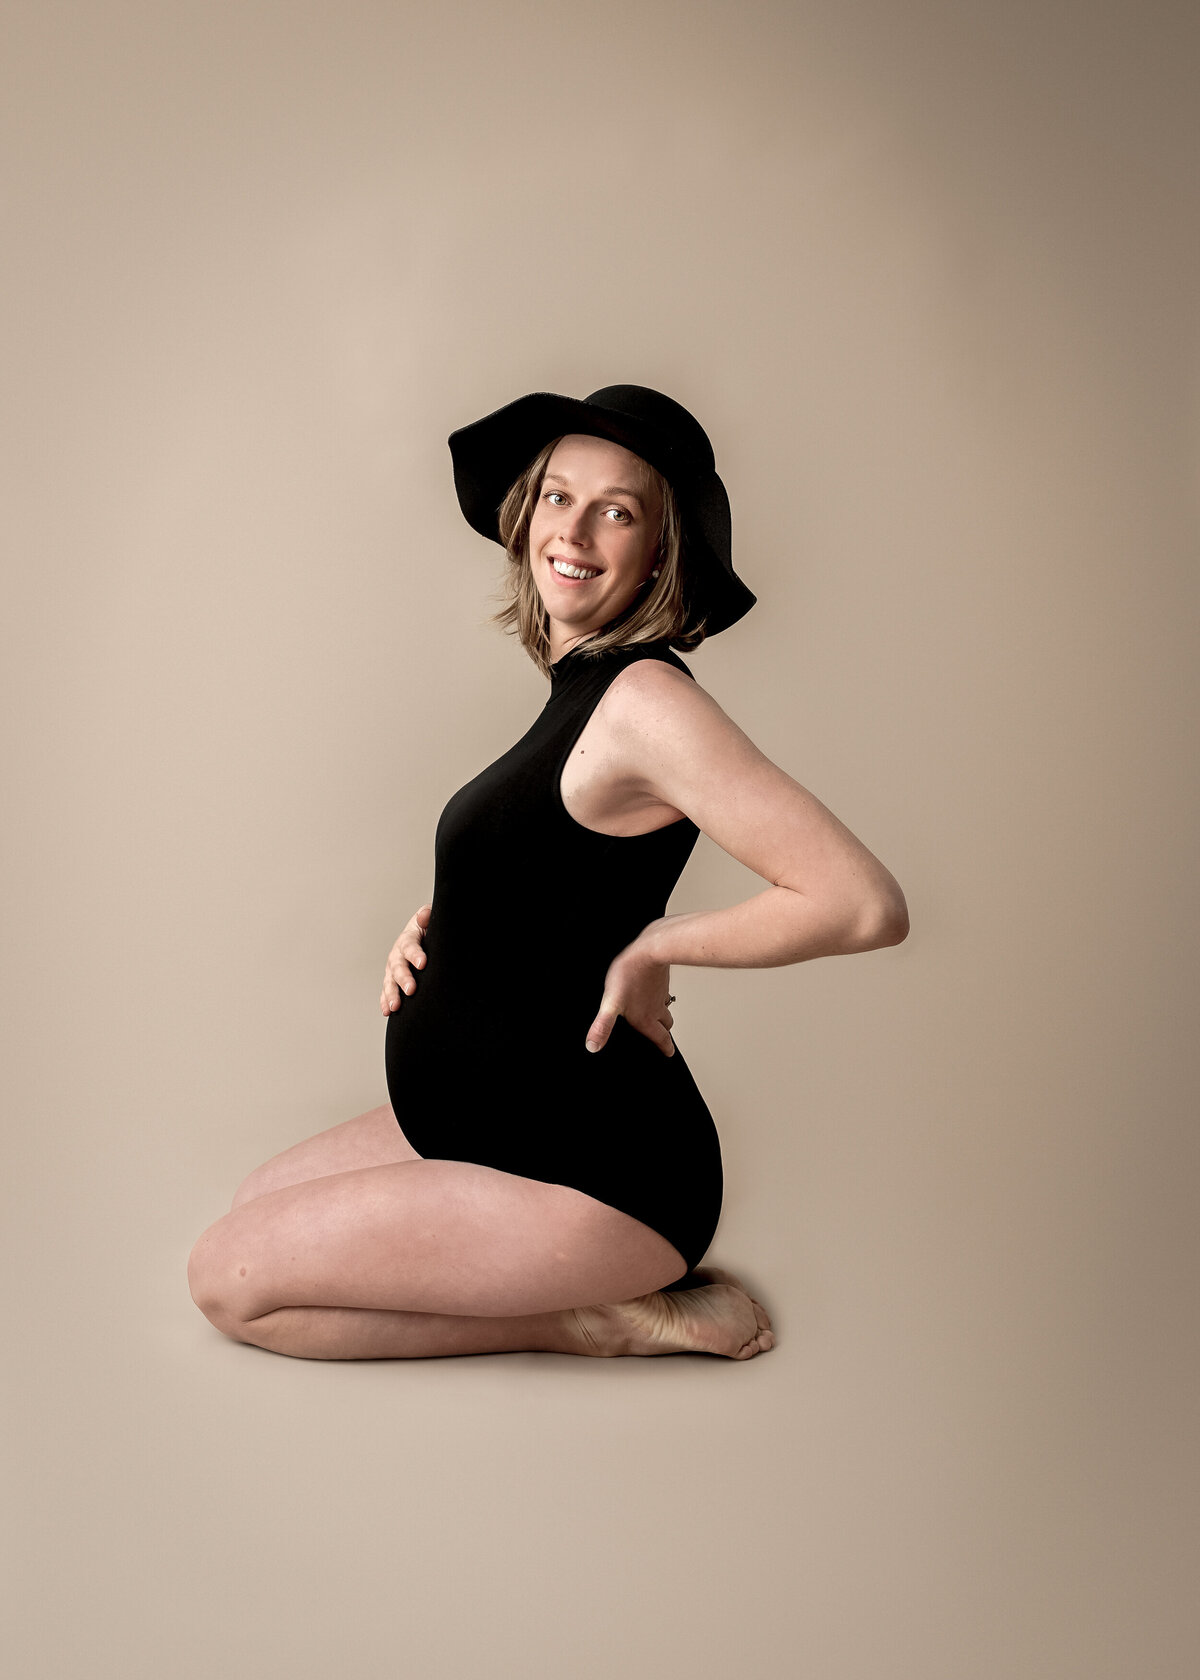 Maternity Fashion Photoshoot in a black bodysuit at a hat by Lauren Vanier Photography in Hobart Tasmania